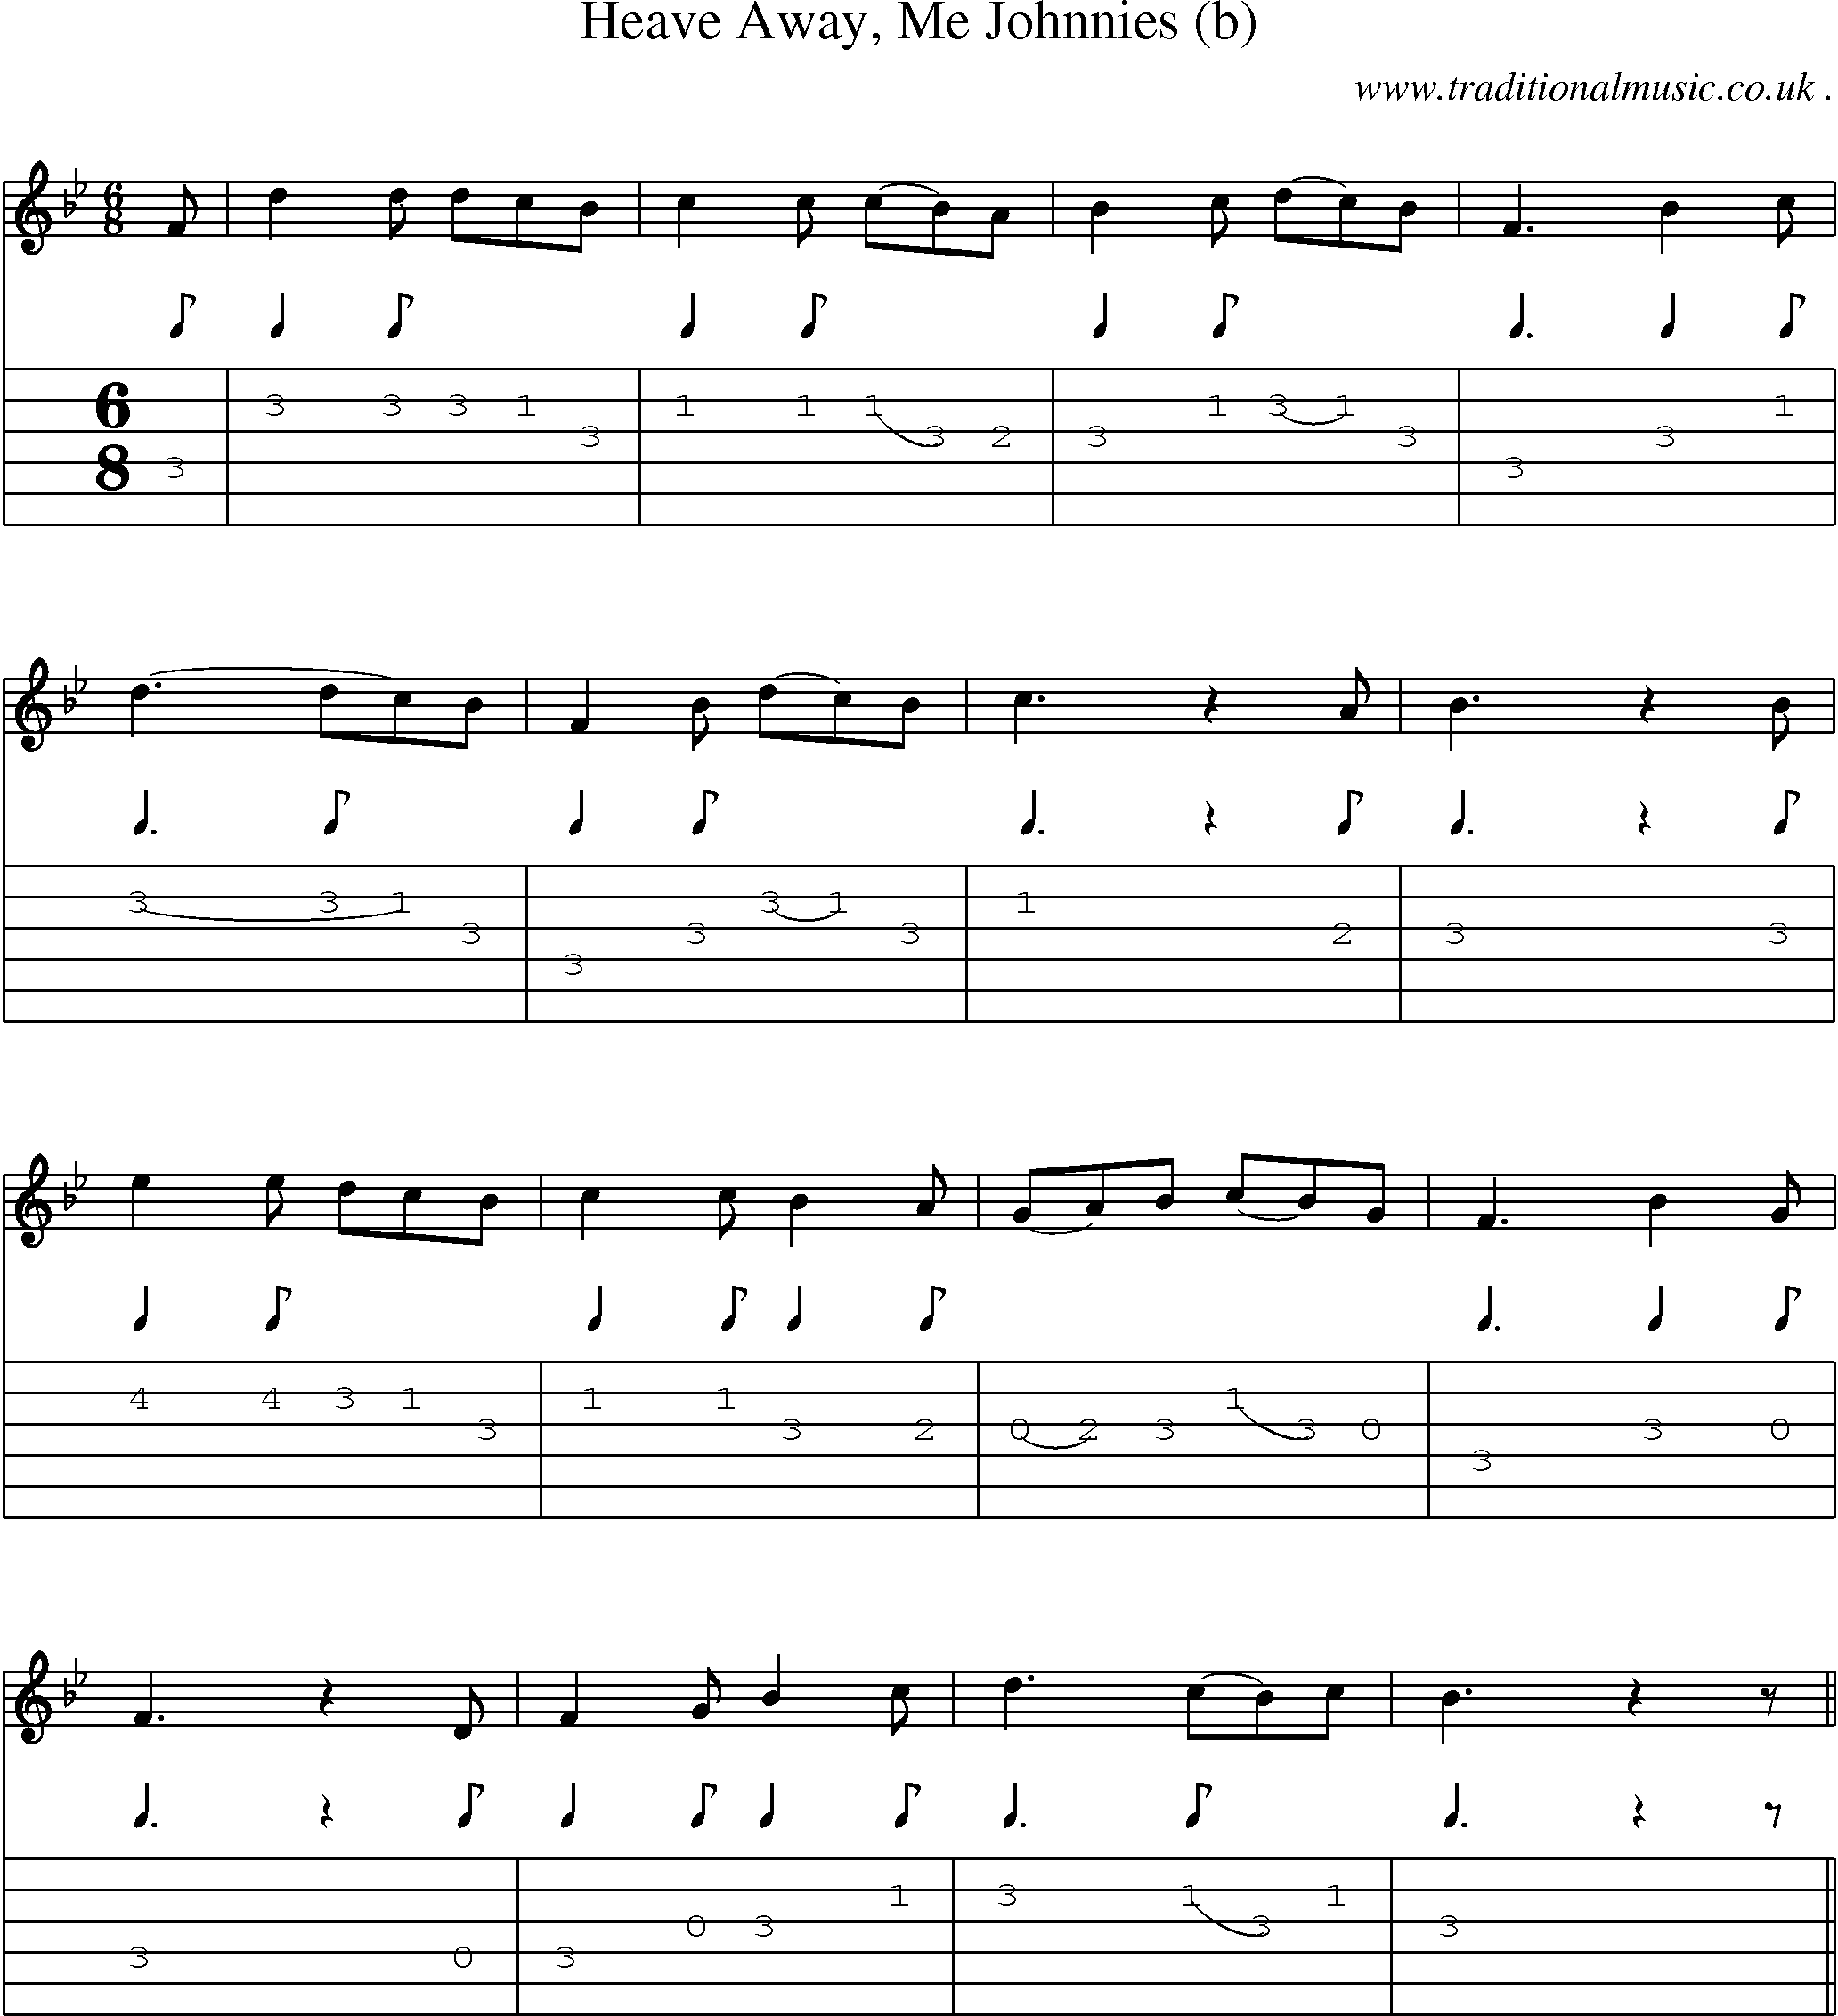 Sheet-Music and Guitar Tabs for Heave Away Me Johnnies (b)